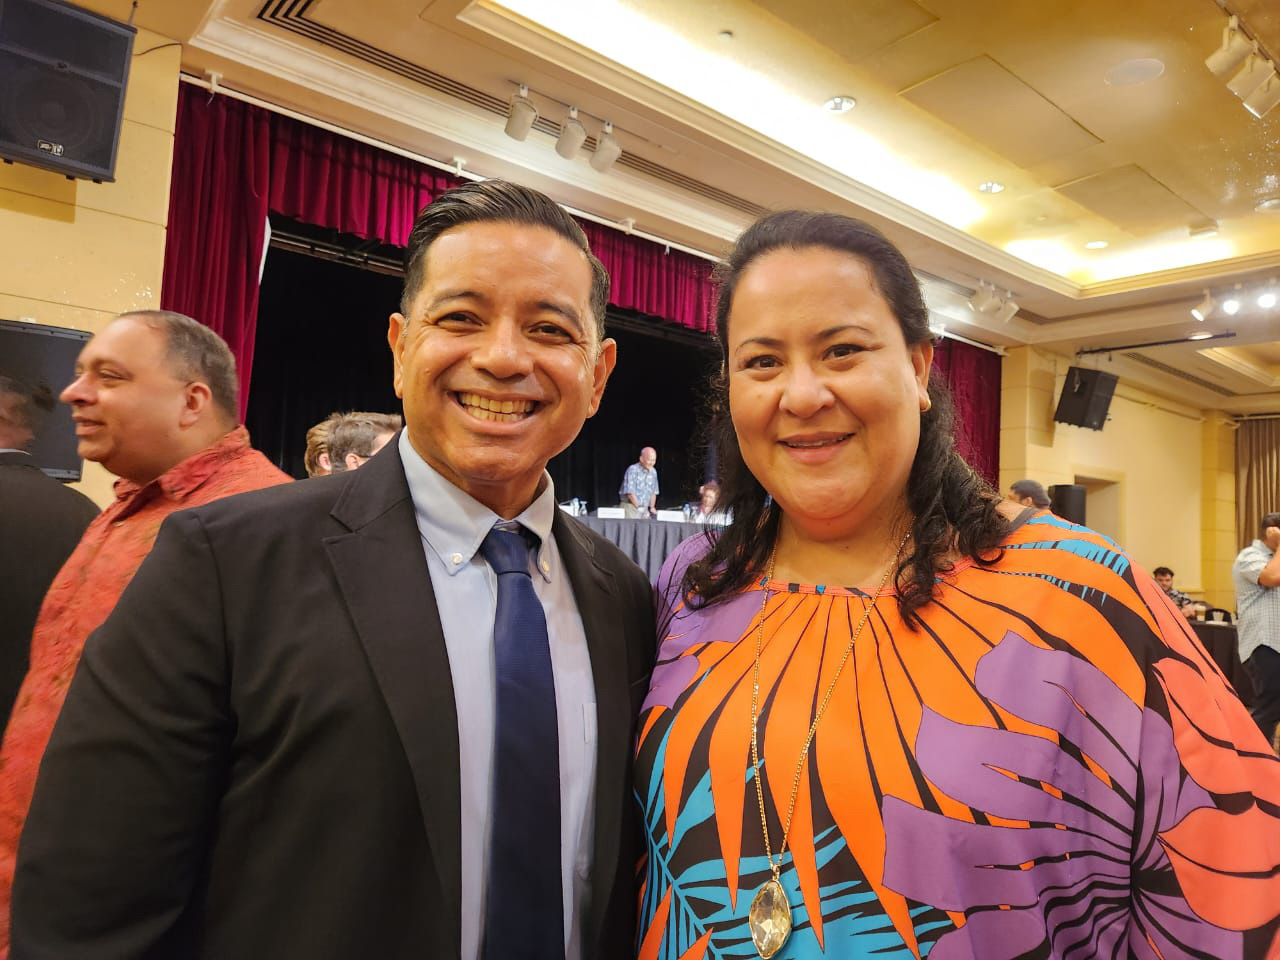 (From left) Frankie Eliptico, vice president for administration and advancement, Northern Marianas College; and Michelle Kramer, managing director for Pacific International Inc. (Guam). Photos by Maureen N. Maratita